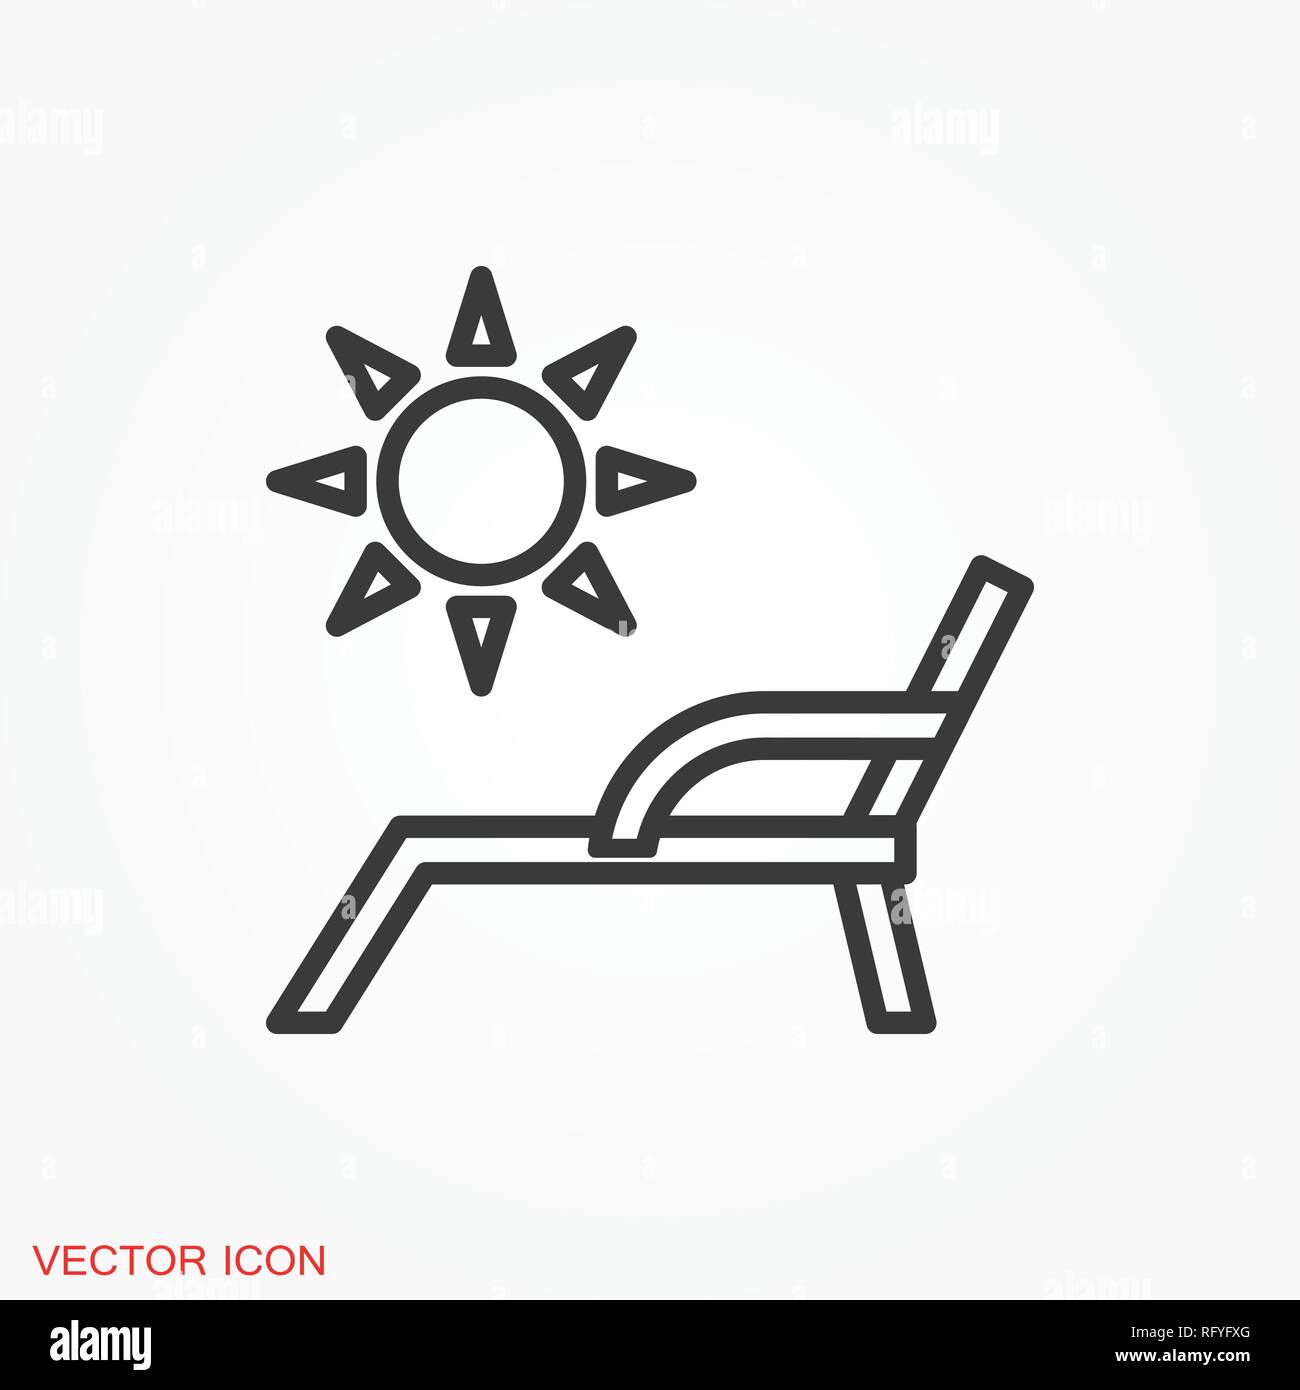 Chaise lounge icon logo, vector sign symbol for design Stock Vector ...